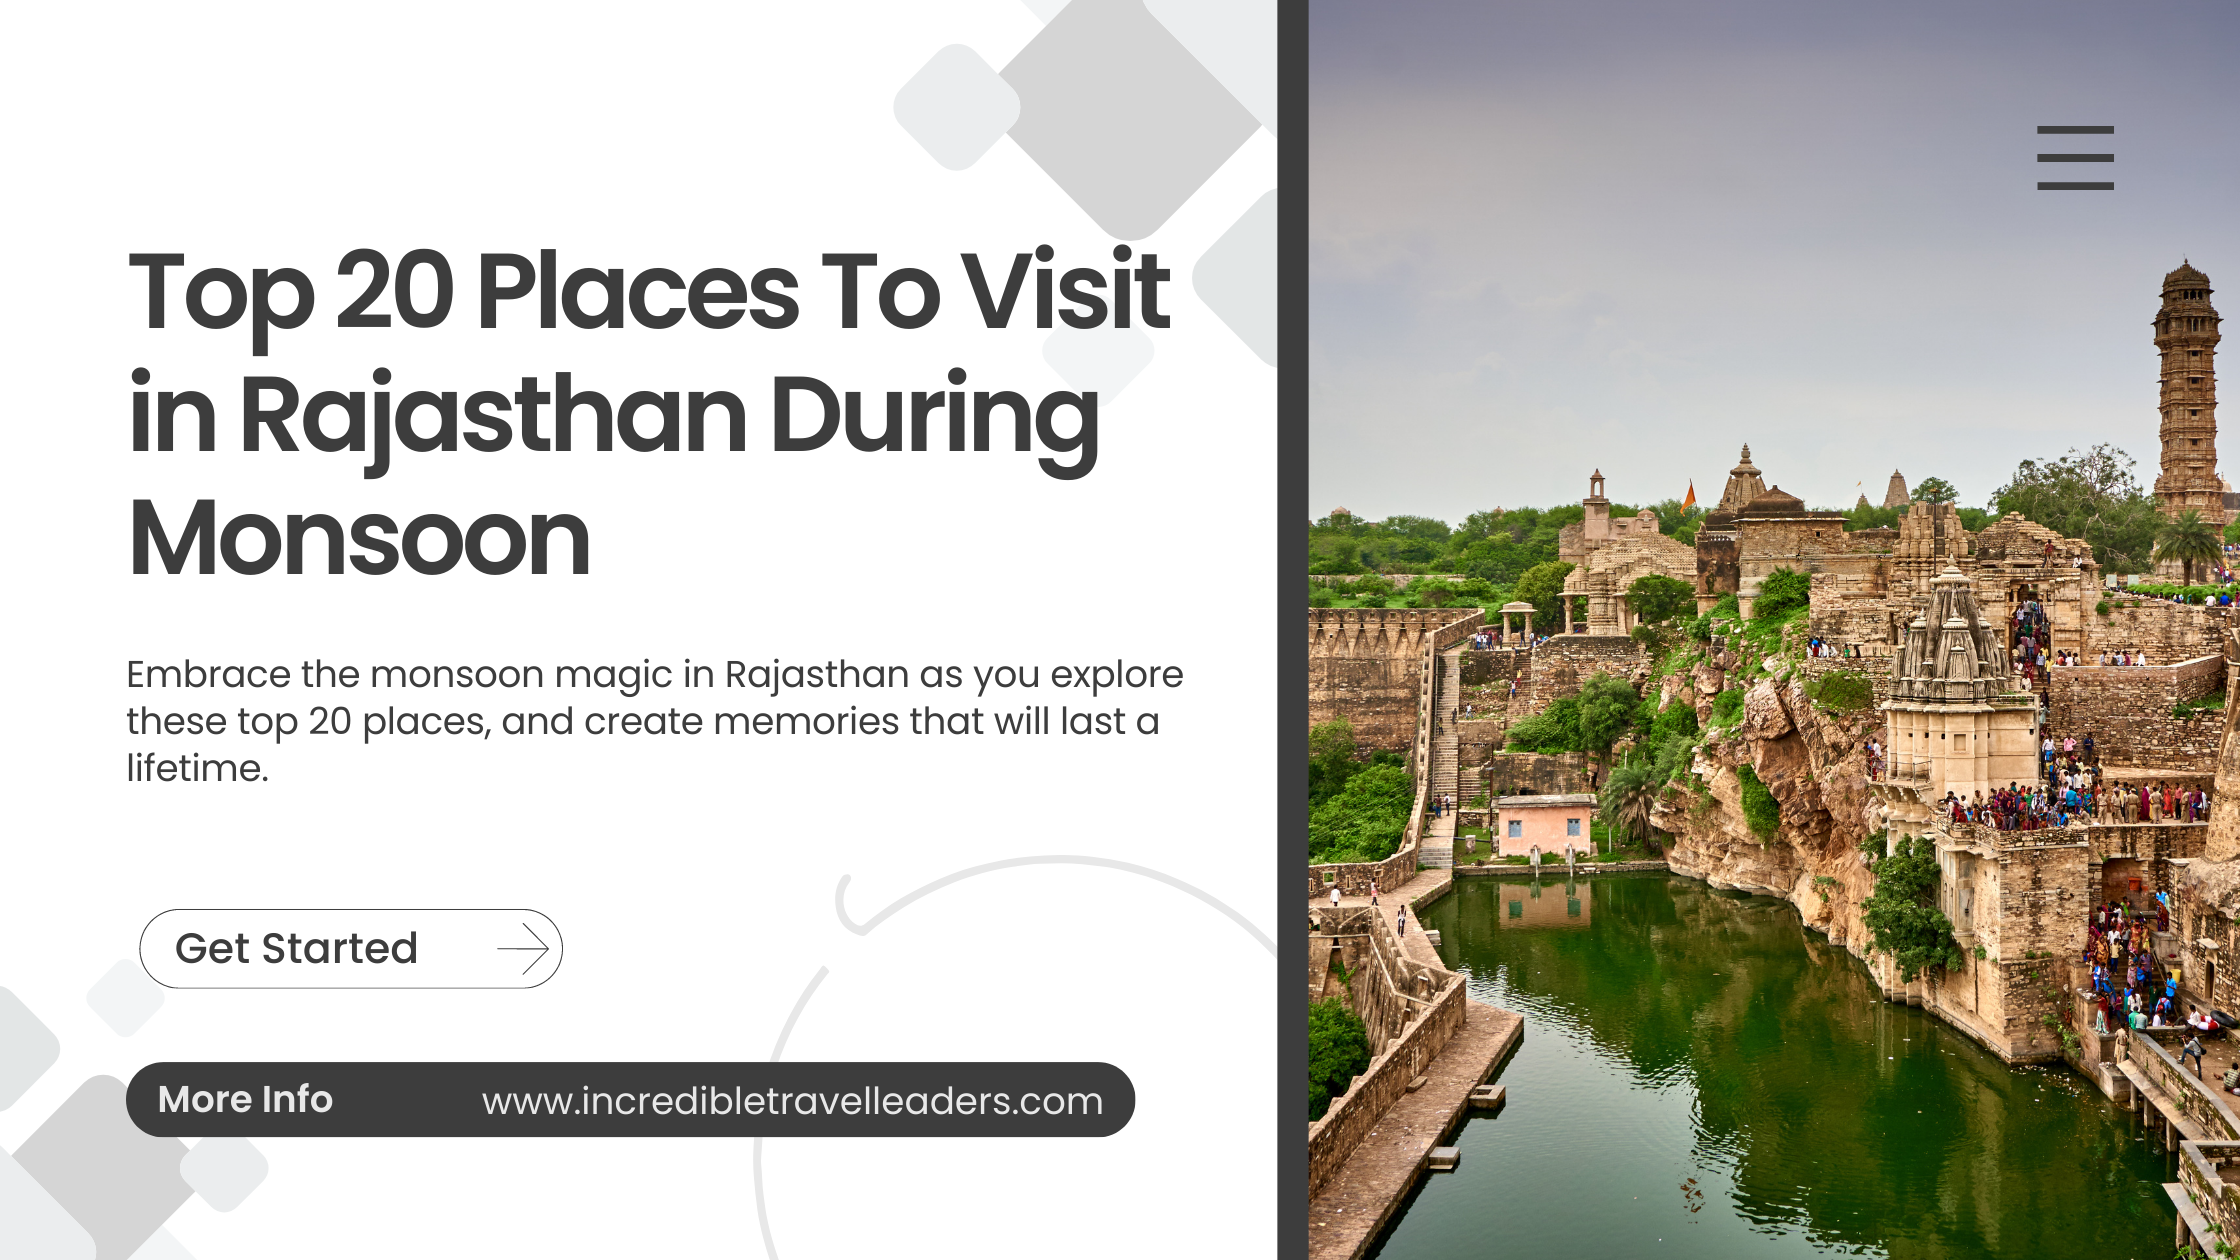 Top 20 Places To Visit in Rajasthan During Monsoon